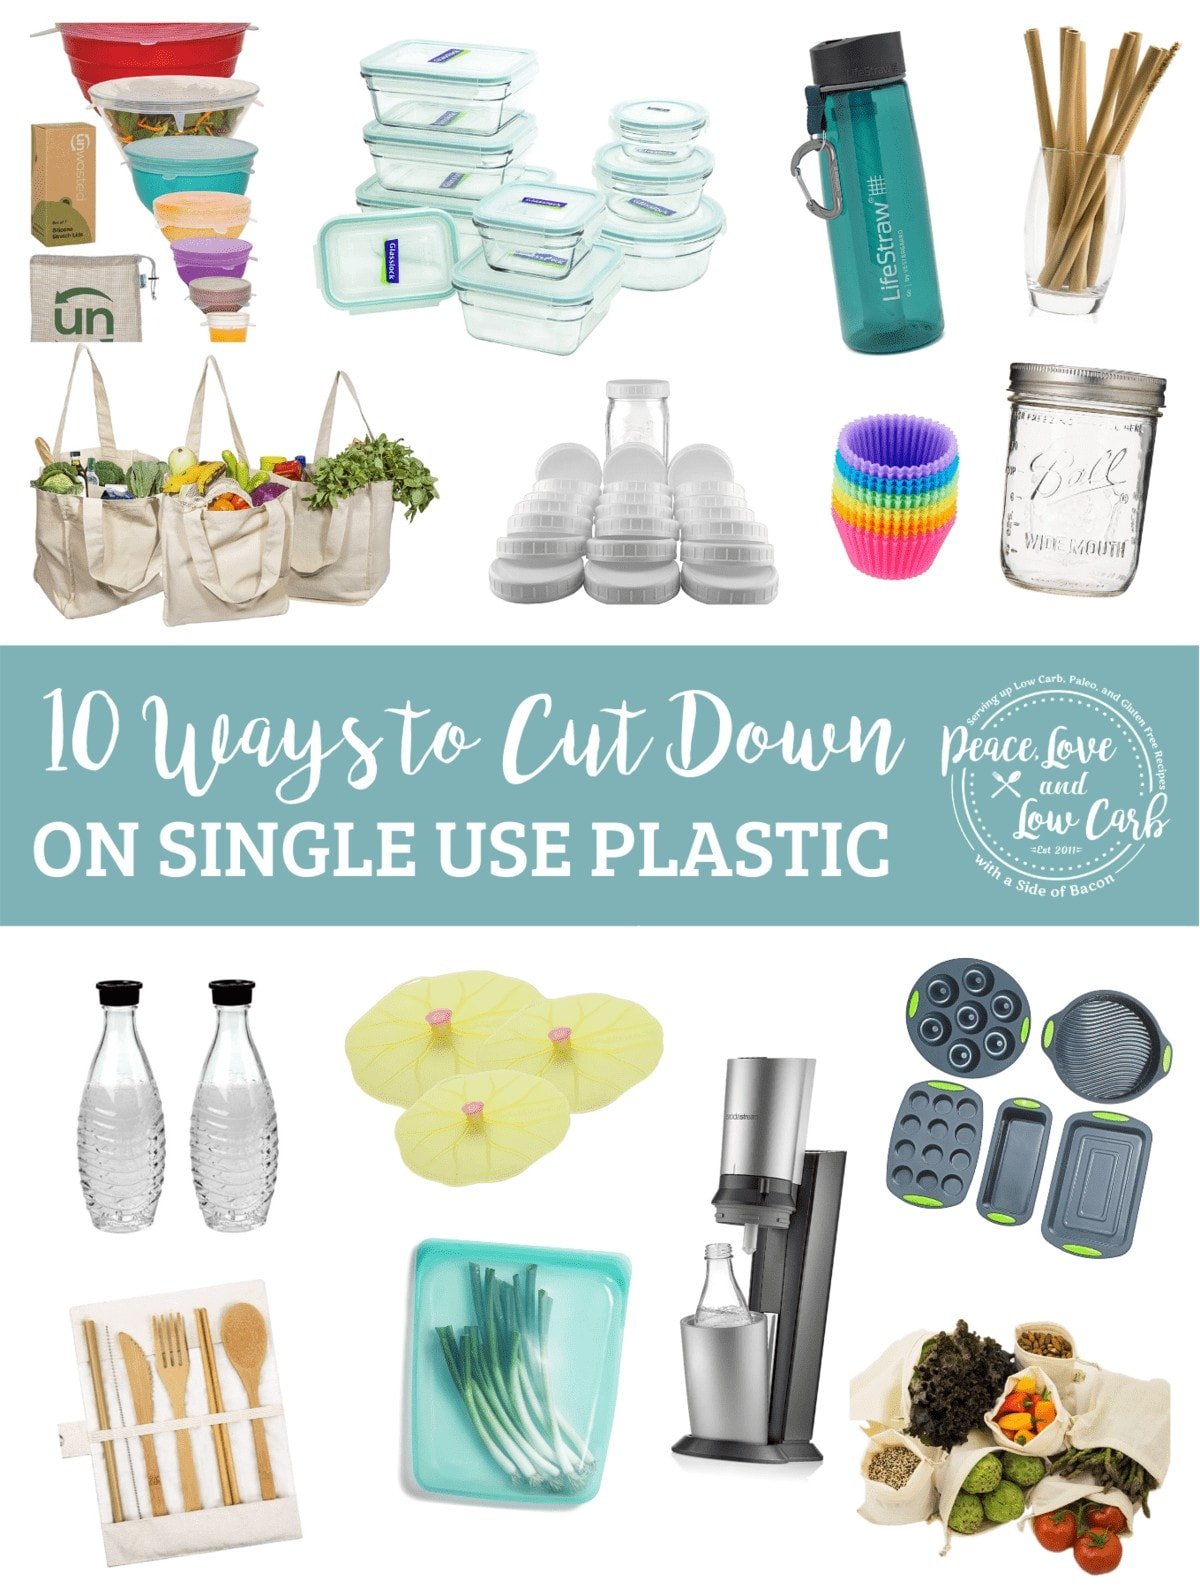 Make cutting back on plastic cute with 50% off Our Place layered